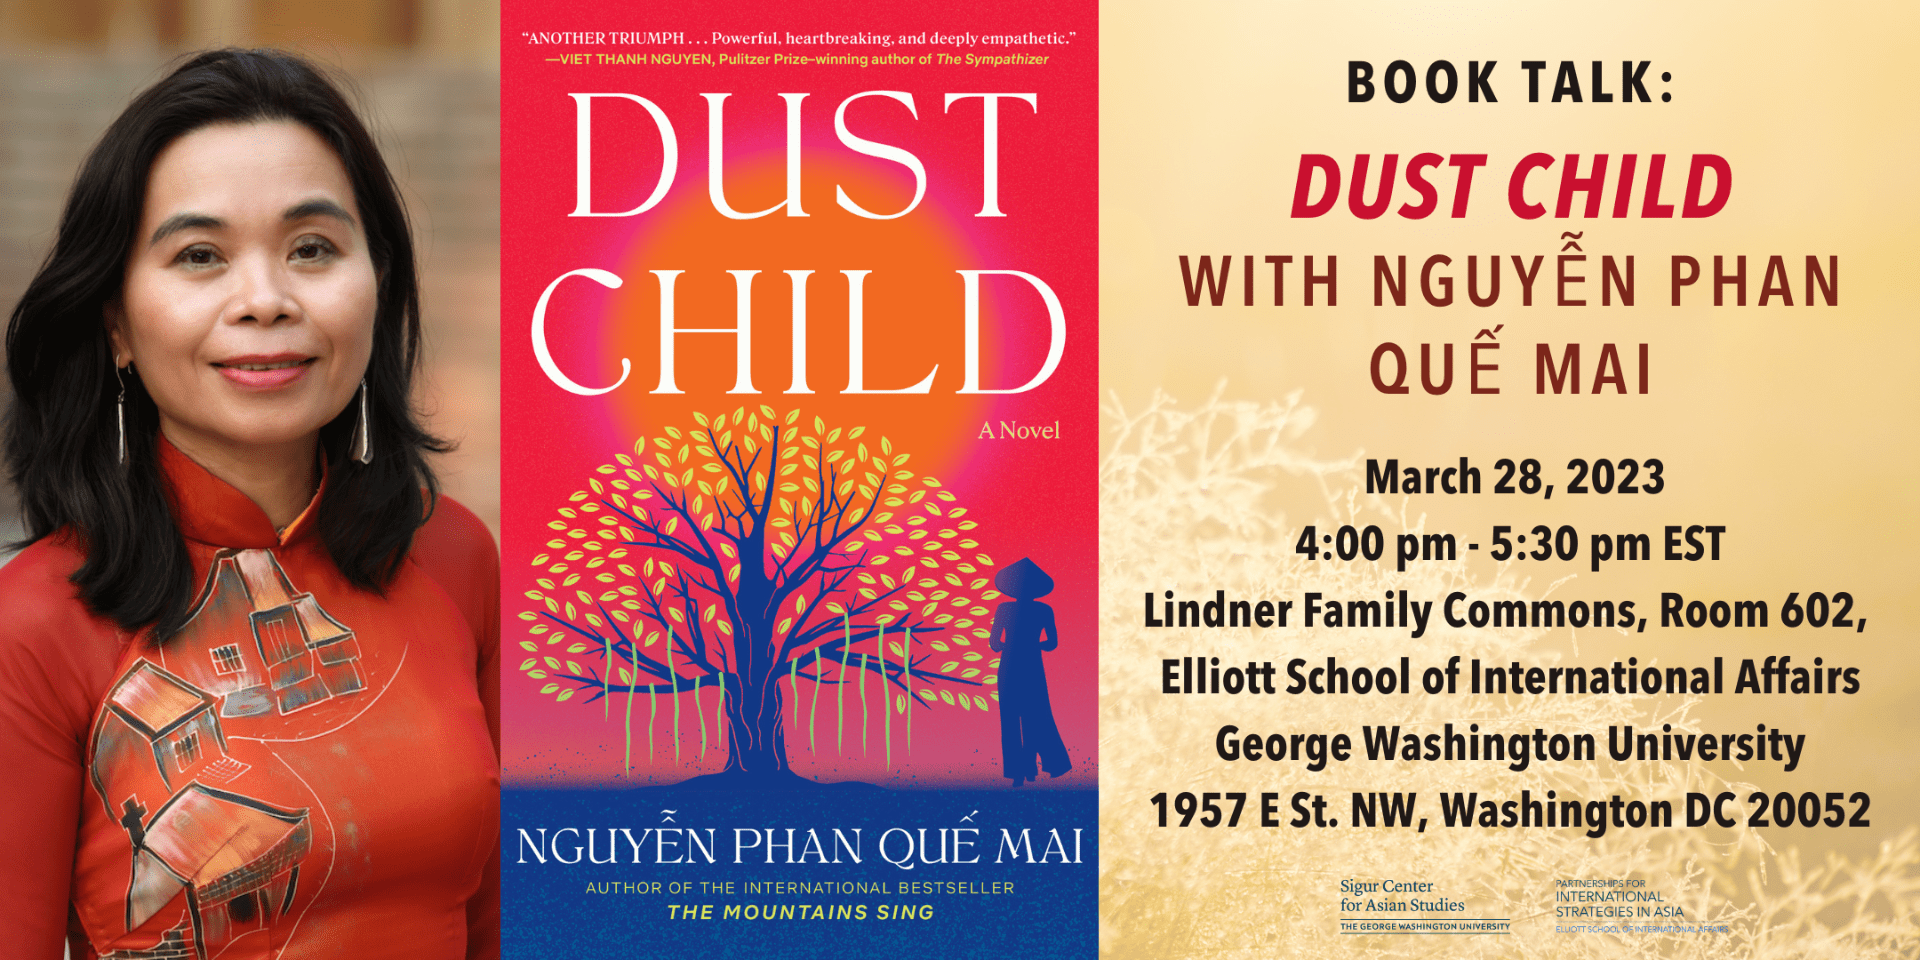 A graphic for "Dust Child" with the name, date, and location of the event